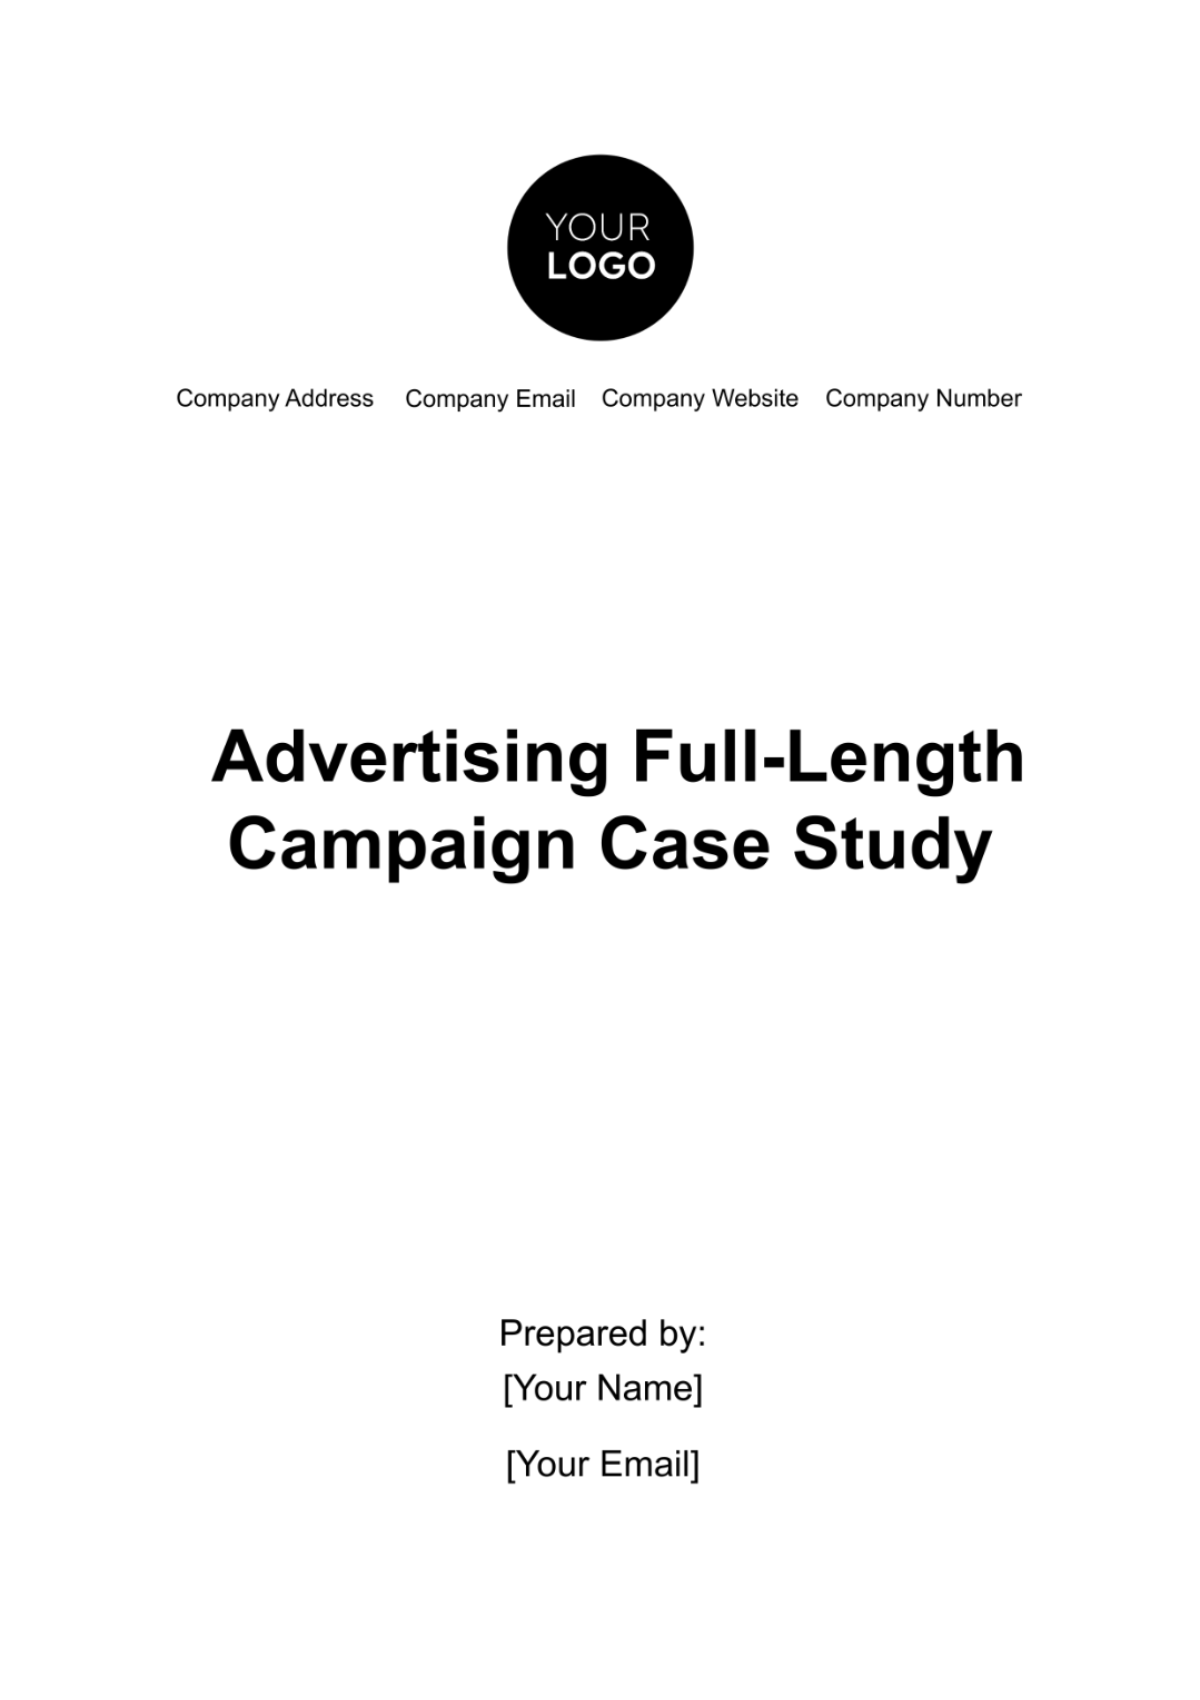 Advertising Full-Length Campaign Case Study Template